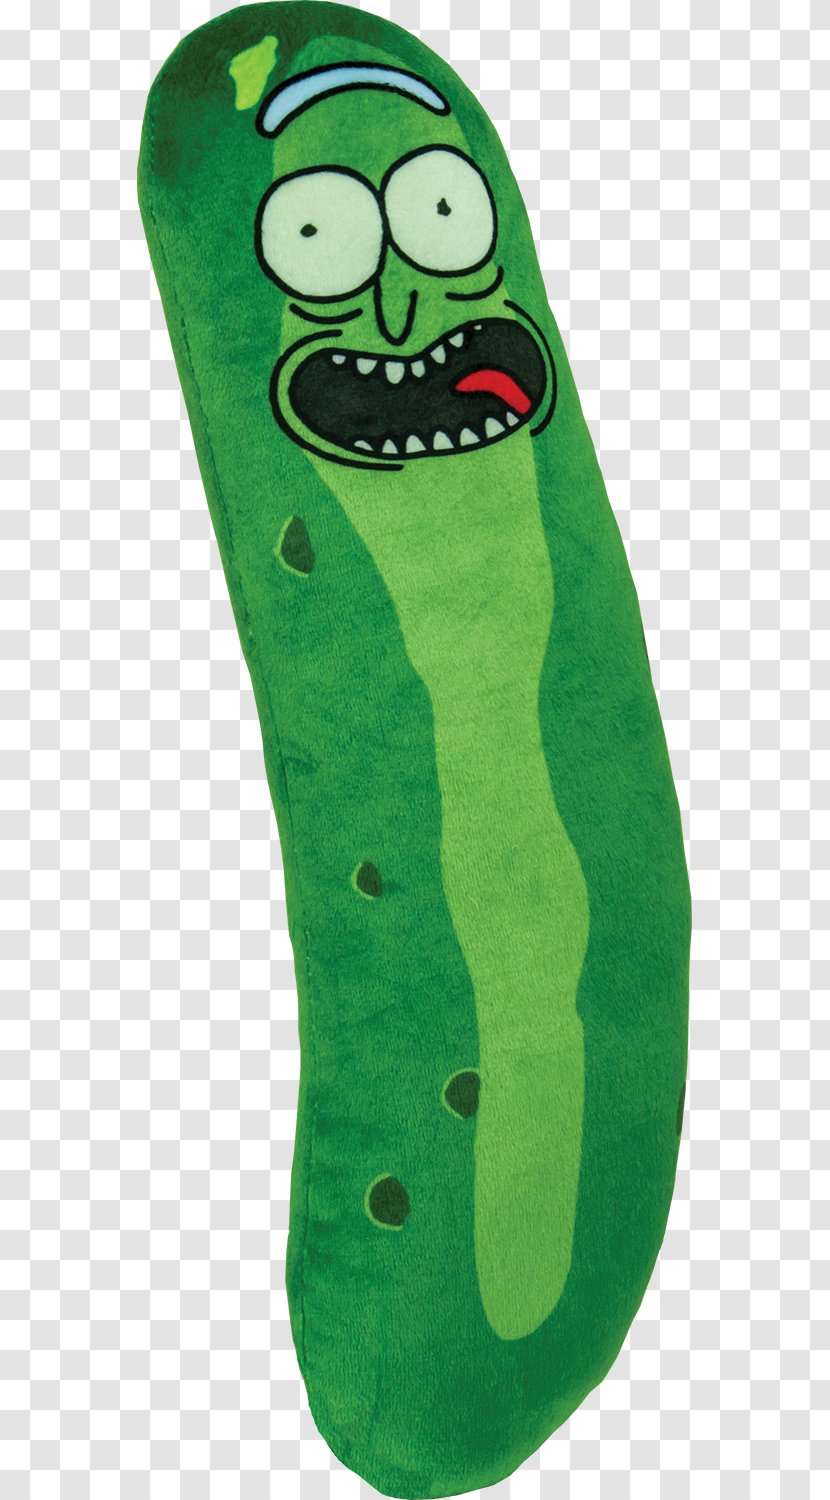 Pickle Rick Morty Smith Pickled Cucumber Stuffed Animals & Cuddly Toys Plush - Funko - And Transparent PNG